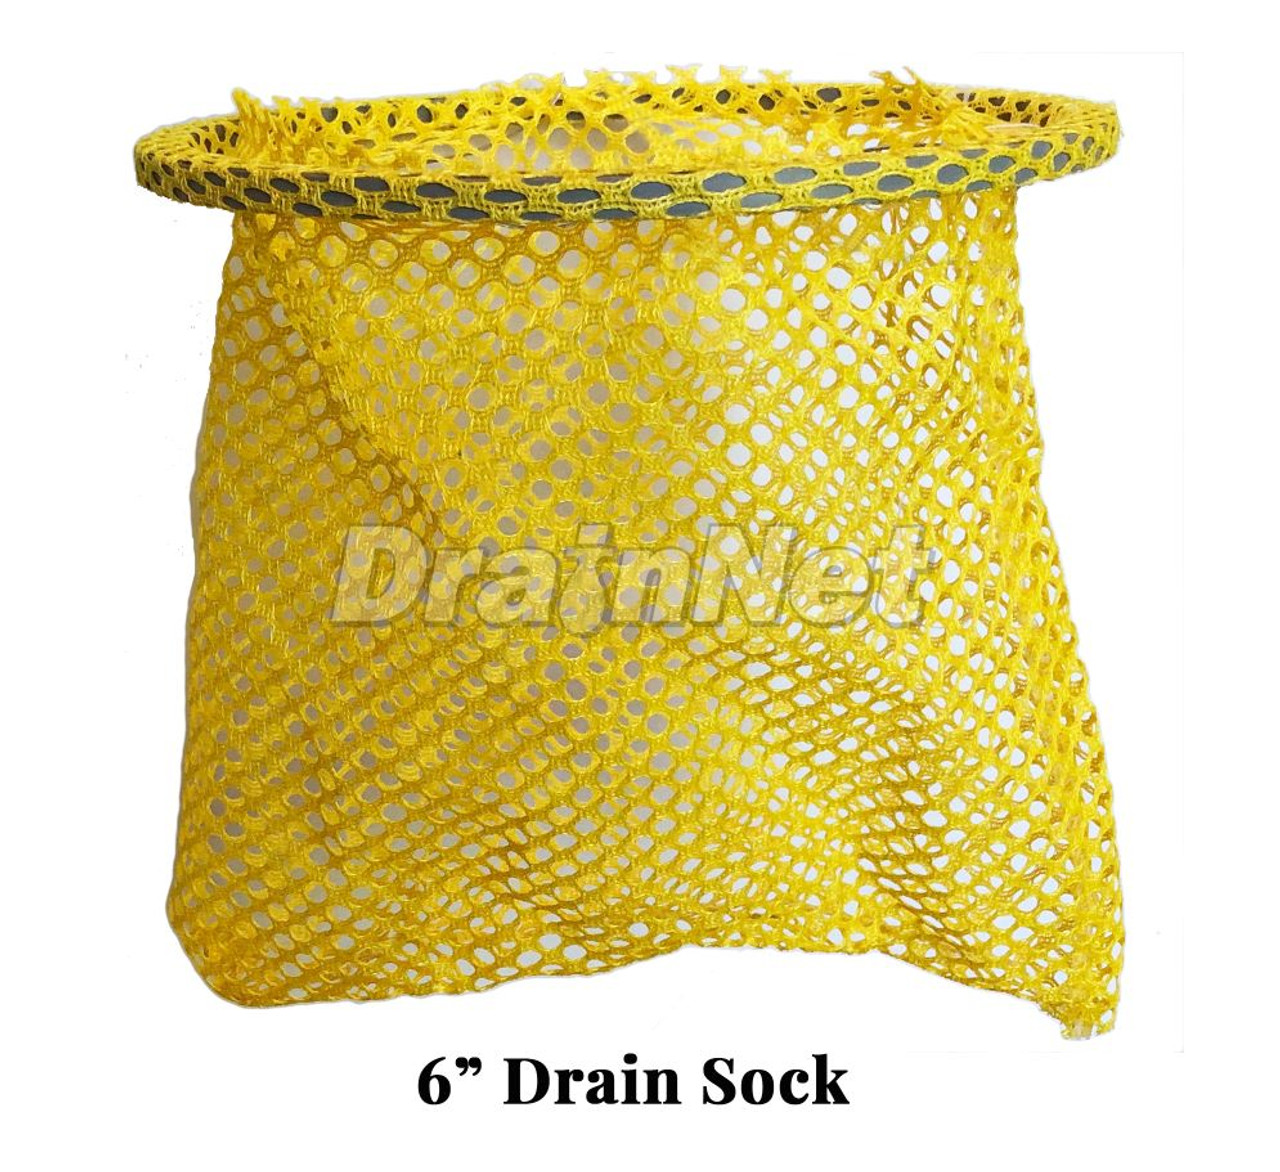 6" drain sock for commercial drains